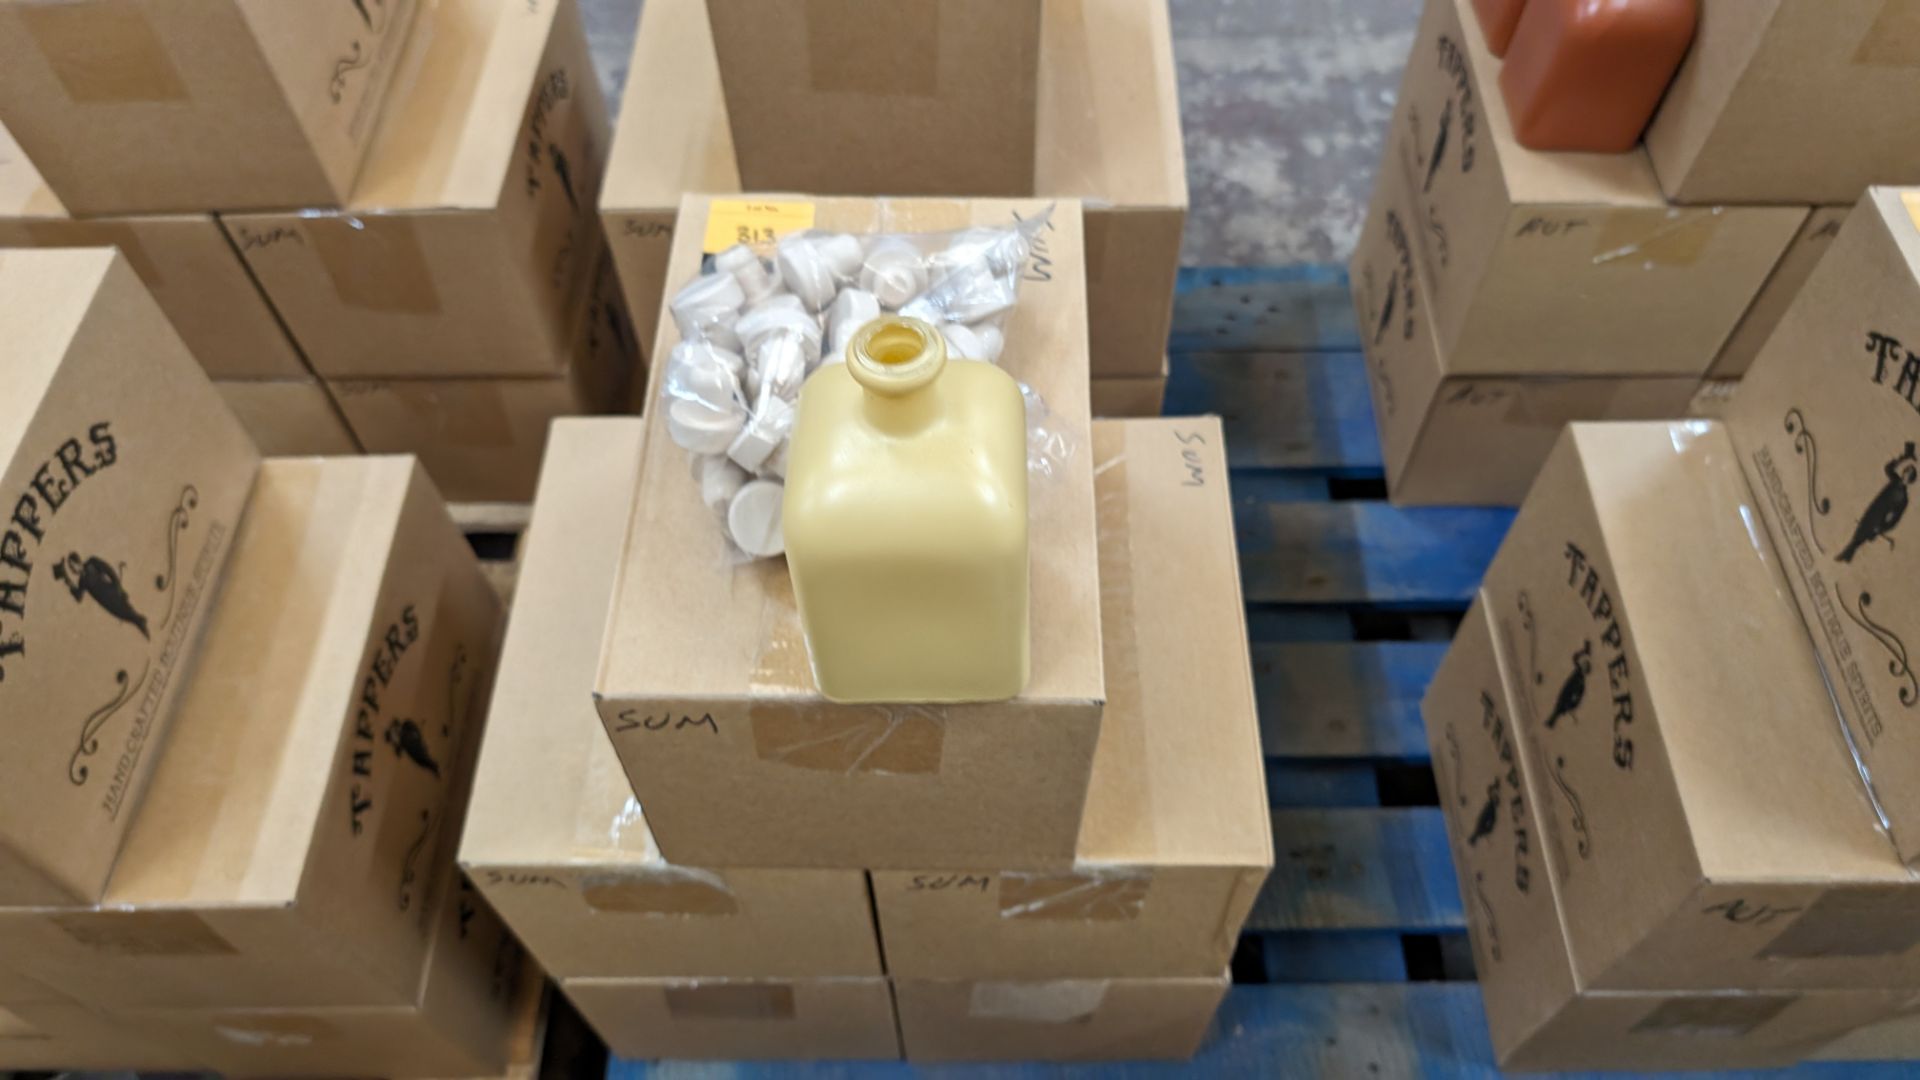 30 off 50cl/500ml professionally painted beige glass bottles, each including a stopper. The bottles